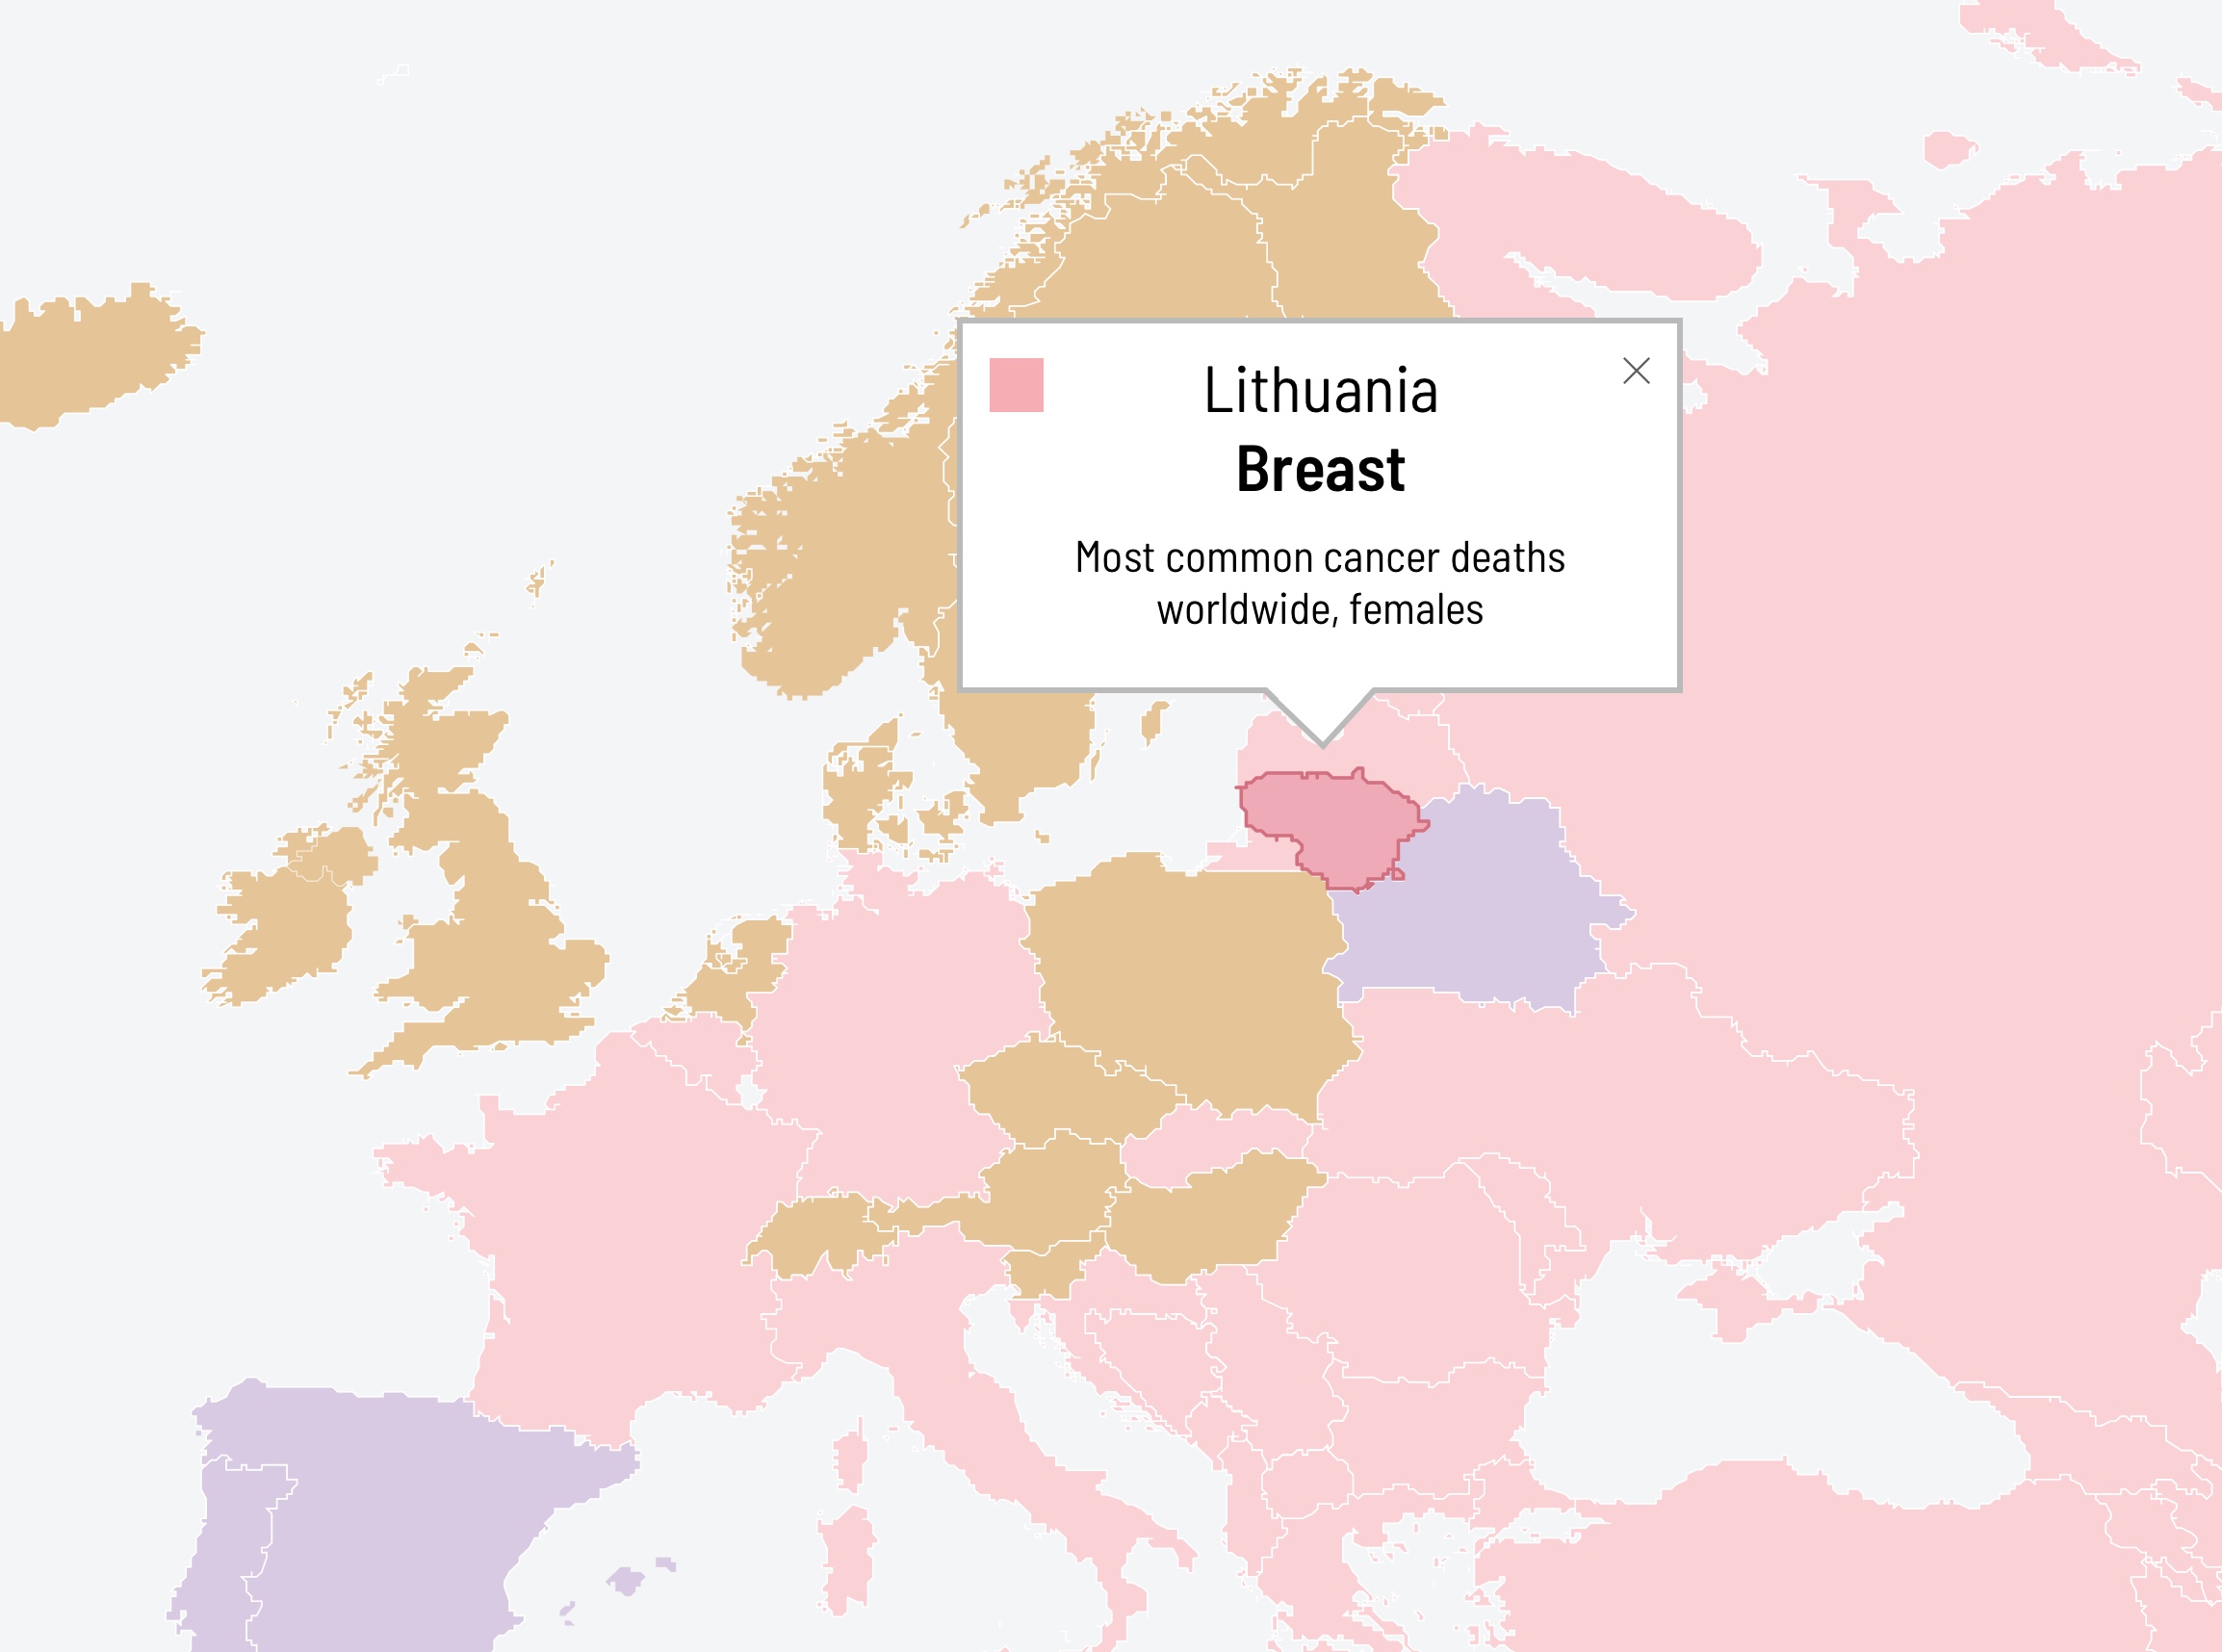 Map of Europe. Headline reads Lithuania, Breast, most common cancer deaths worldwide females